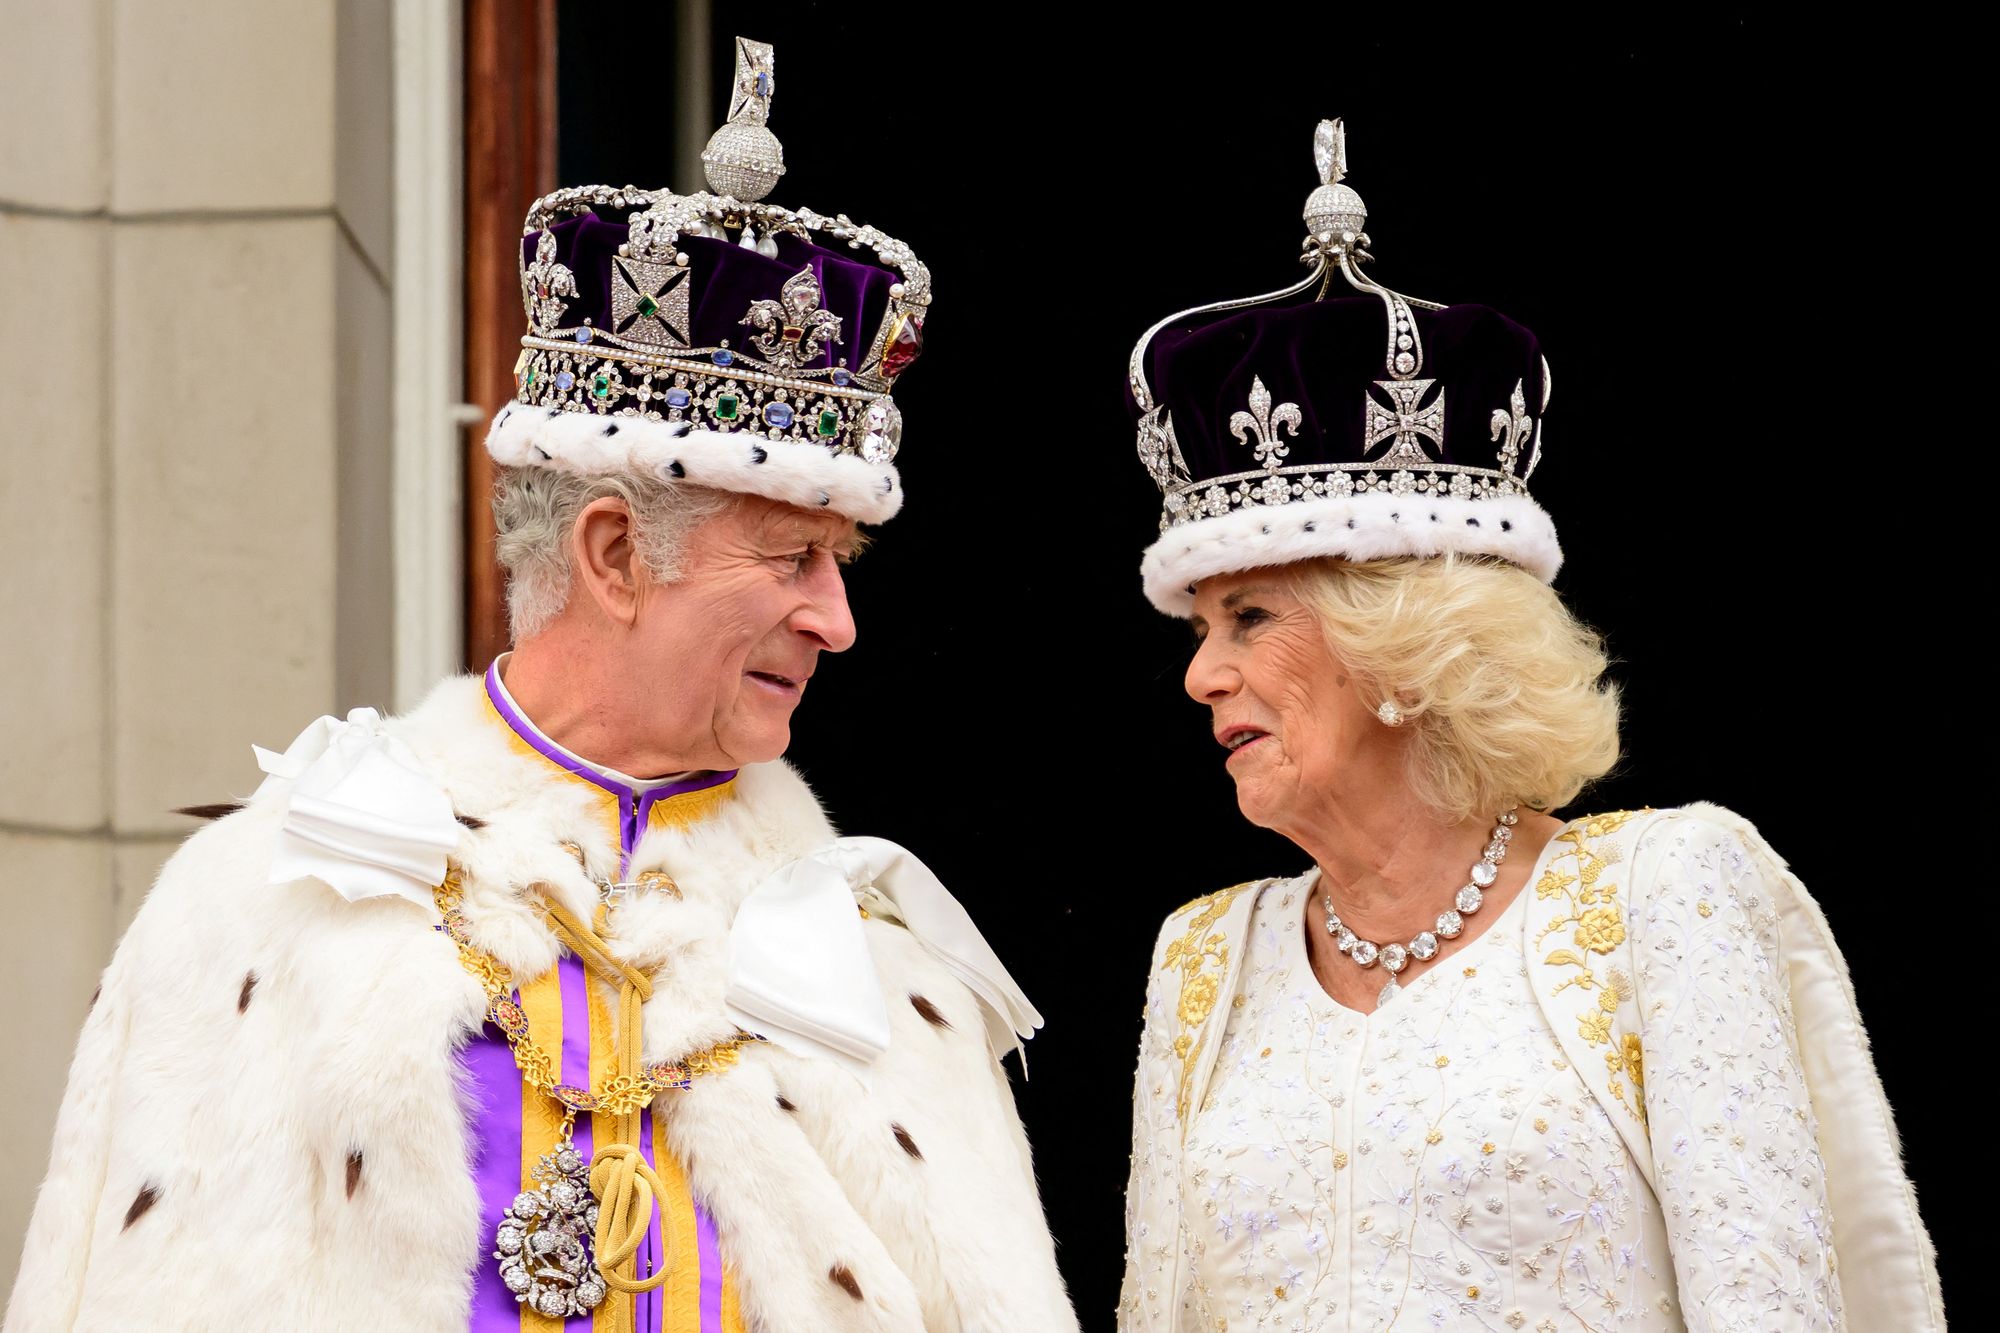 King Charles III's coronation marks a new beginning for the British ...